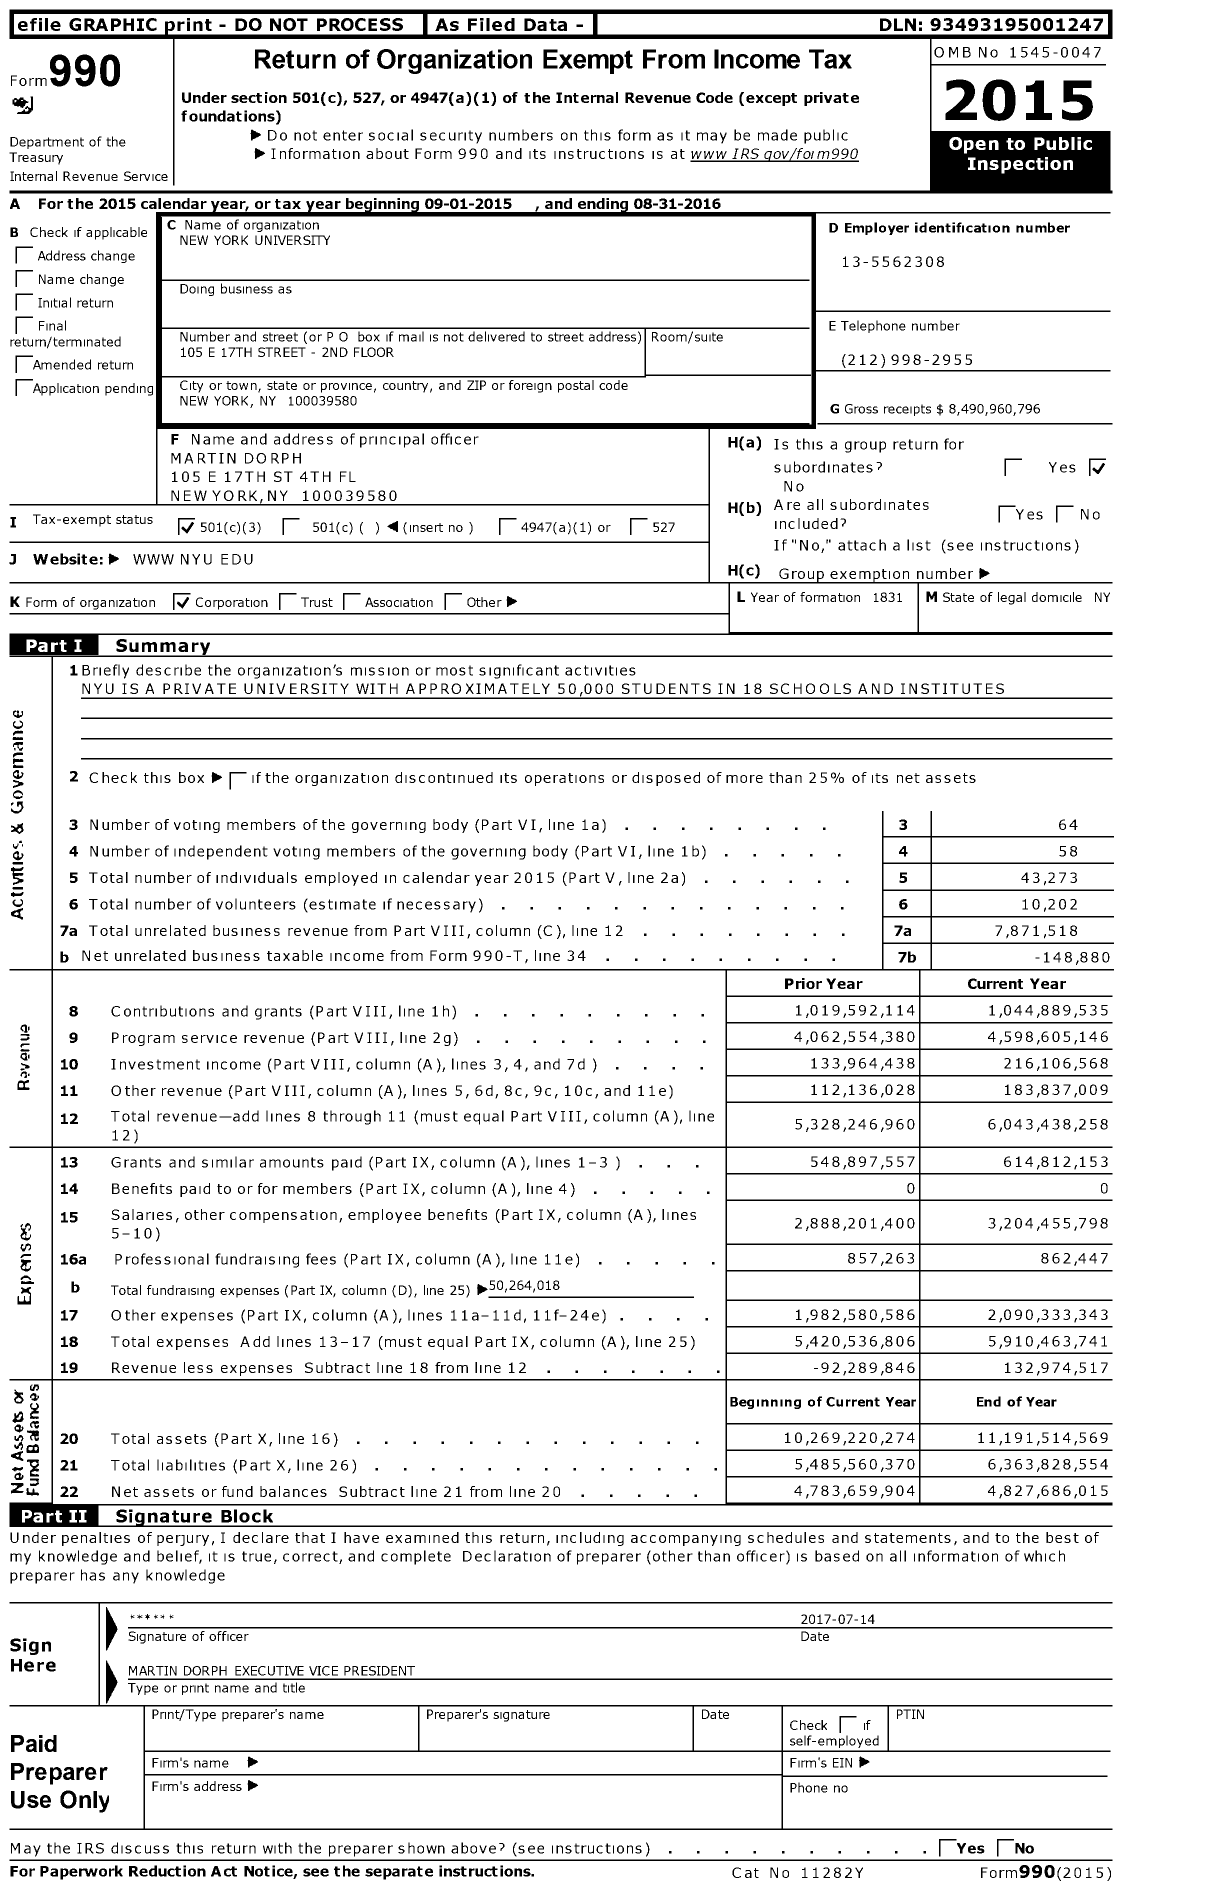 Image of first page of 2015 Form 990 for New York University (NYU)